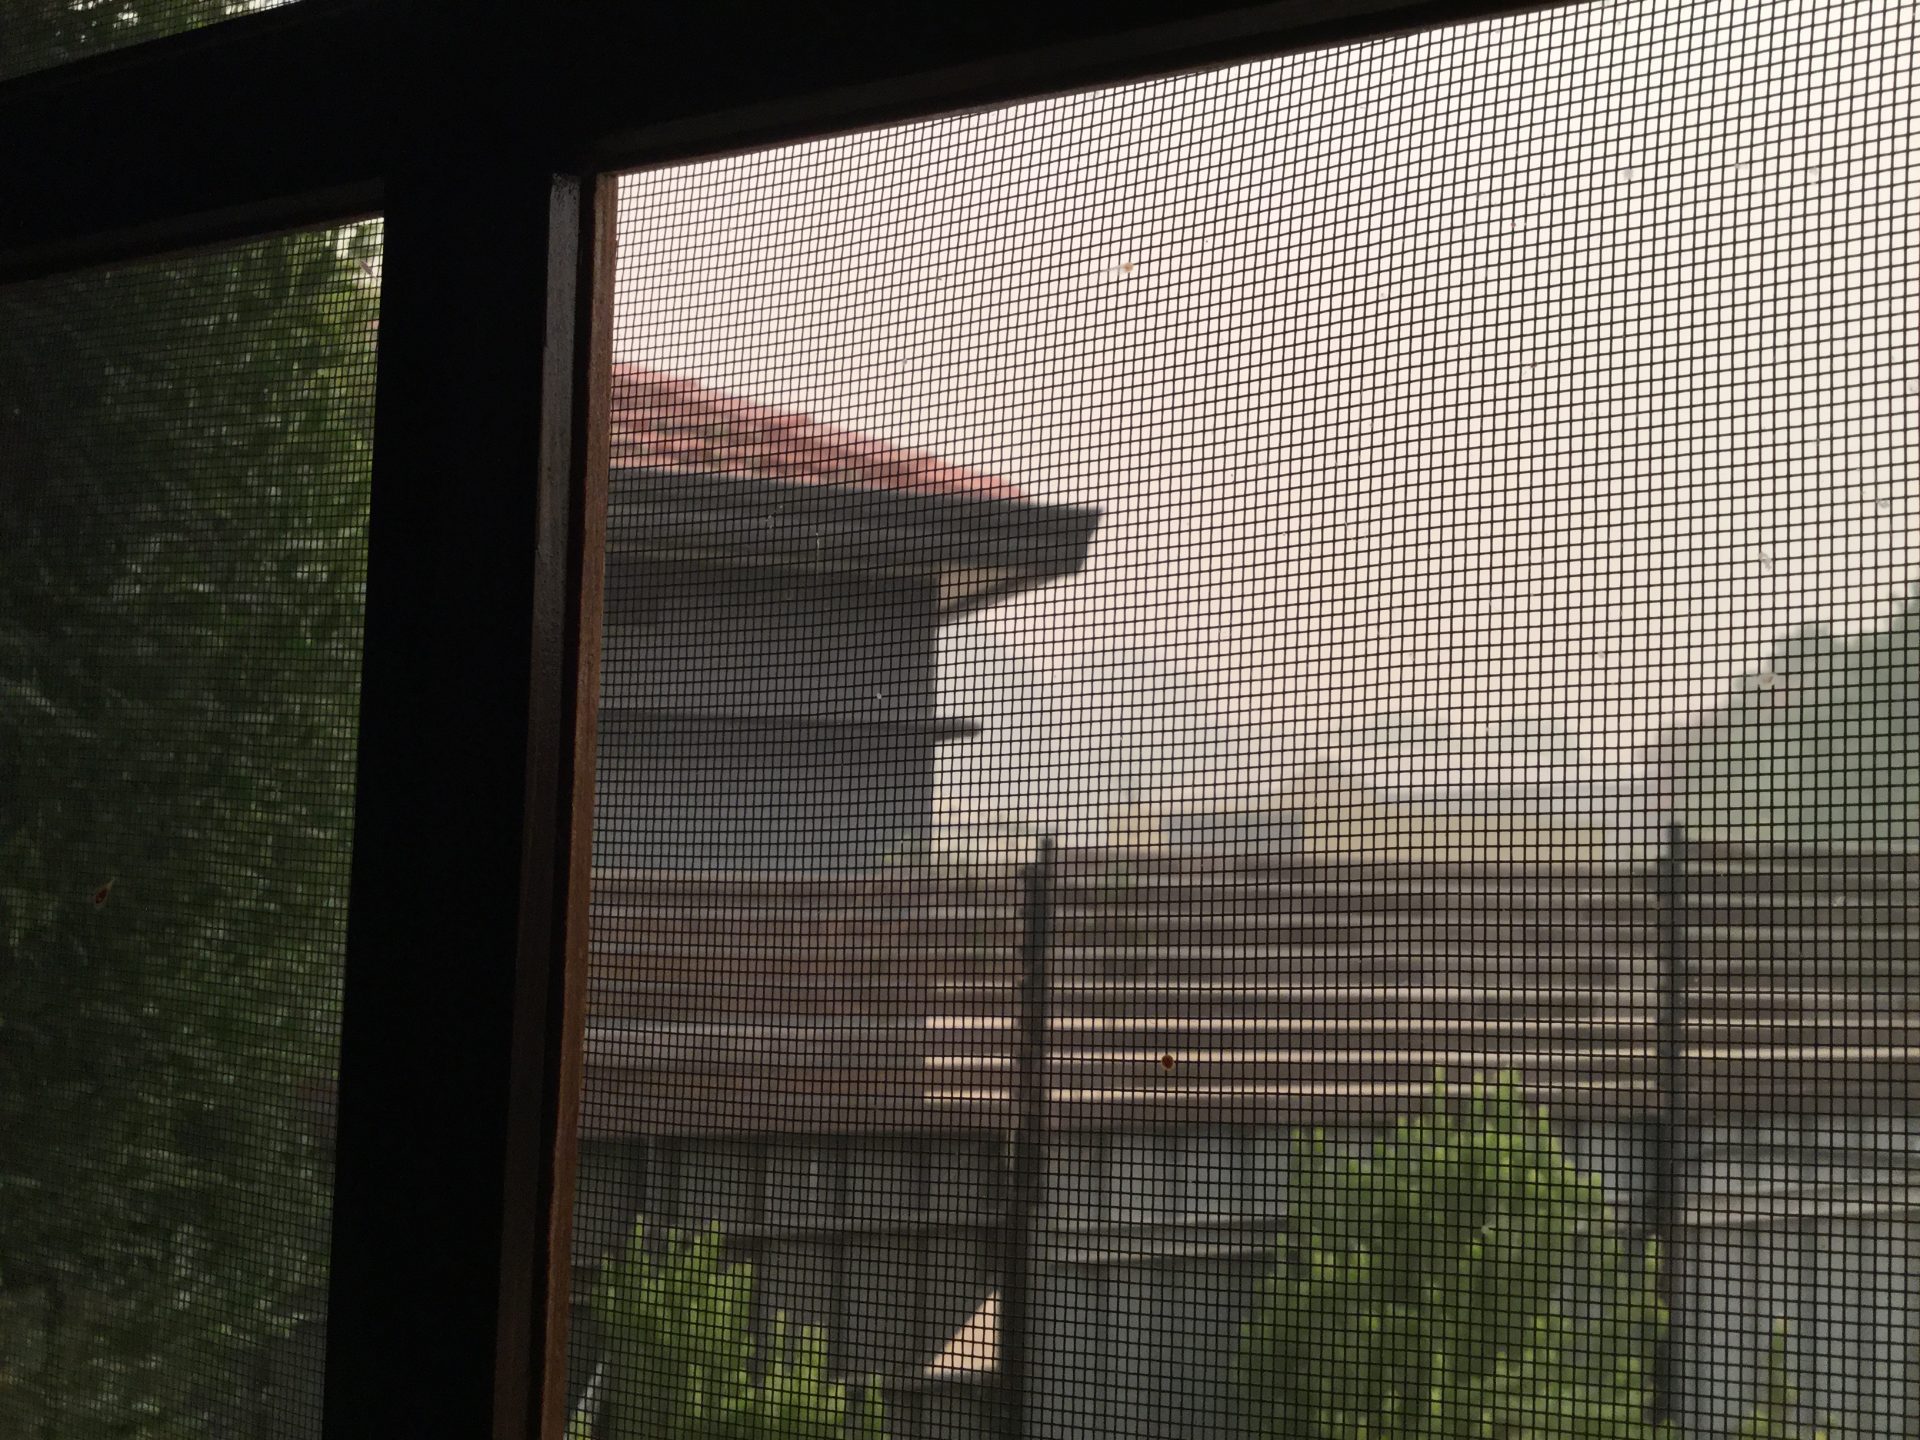 A photograph taken from inside a house through a fly screen looking at smoke covering the city of Wagga Wagga